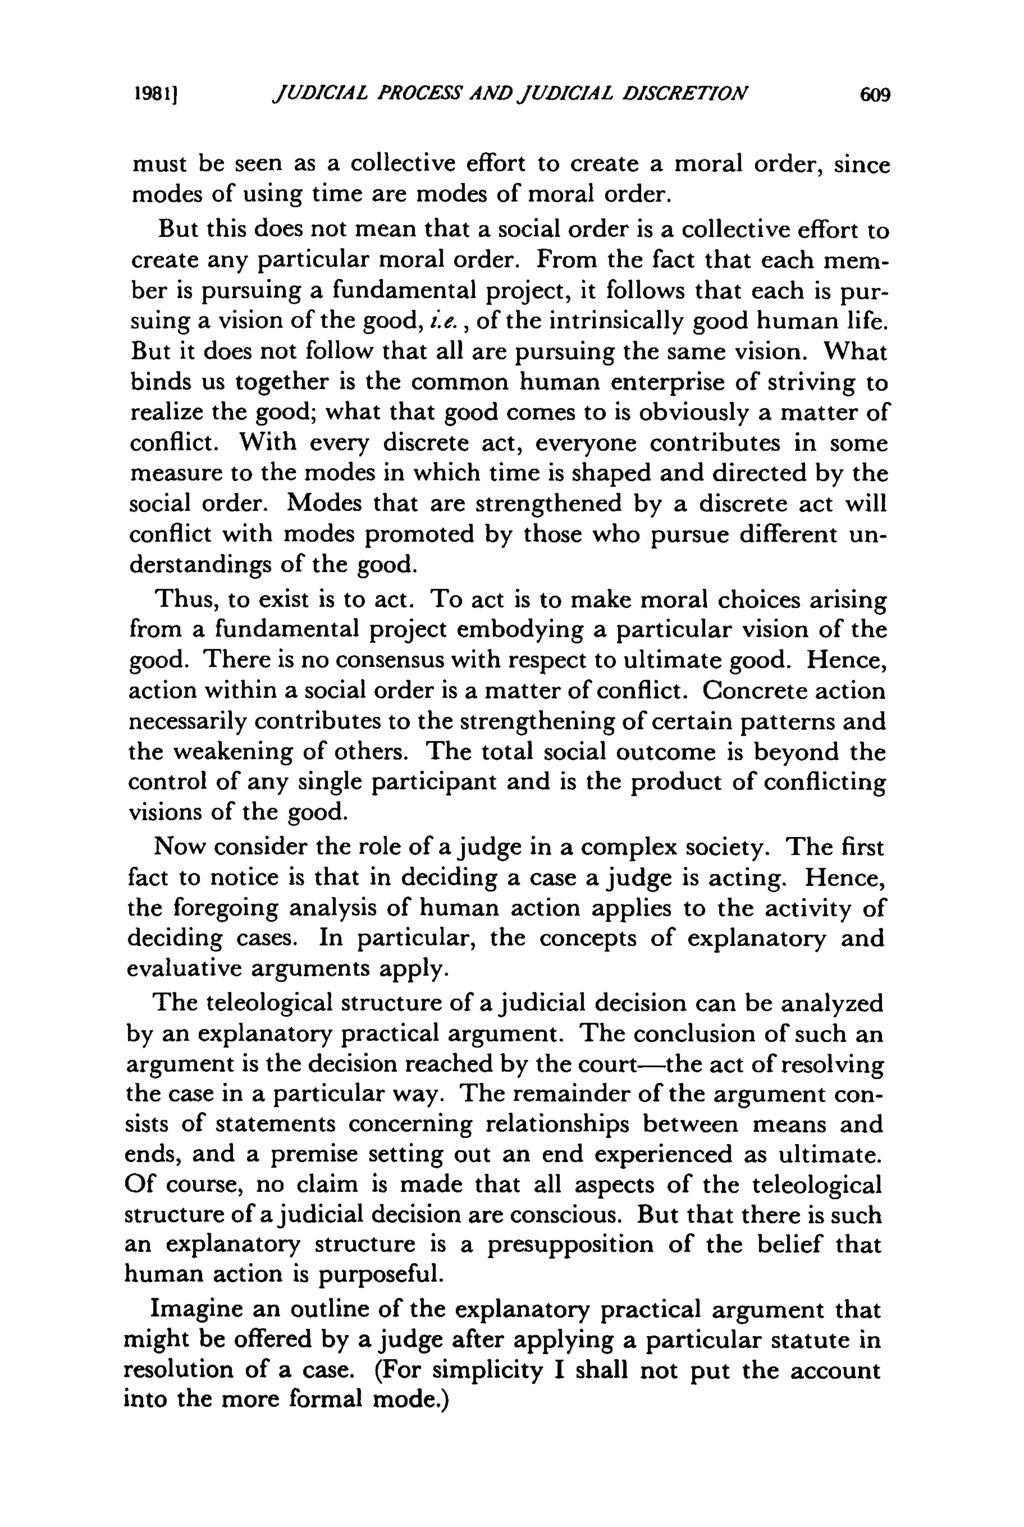 1981] Pannier: The Nature of the Judicial Process and Judicial Discretion JUDICIAL PROCESS AND JUDICIAL DISCRETION must be seen as a collective effort to create a moral order, since modes of using